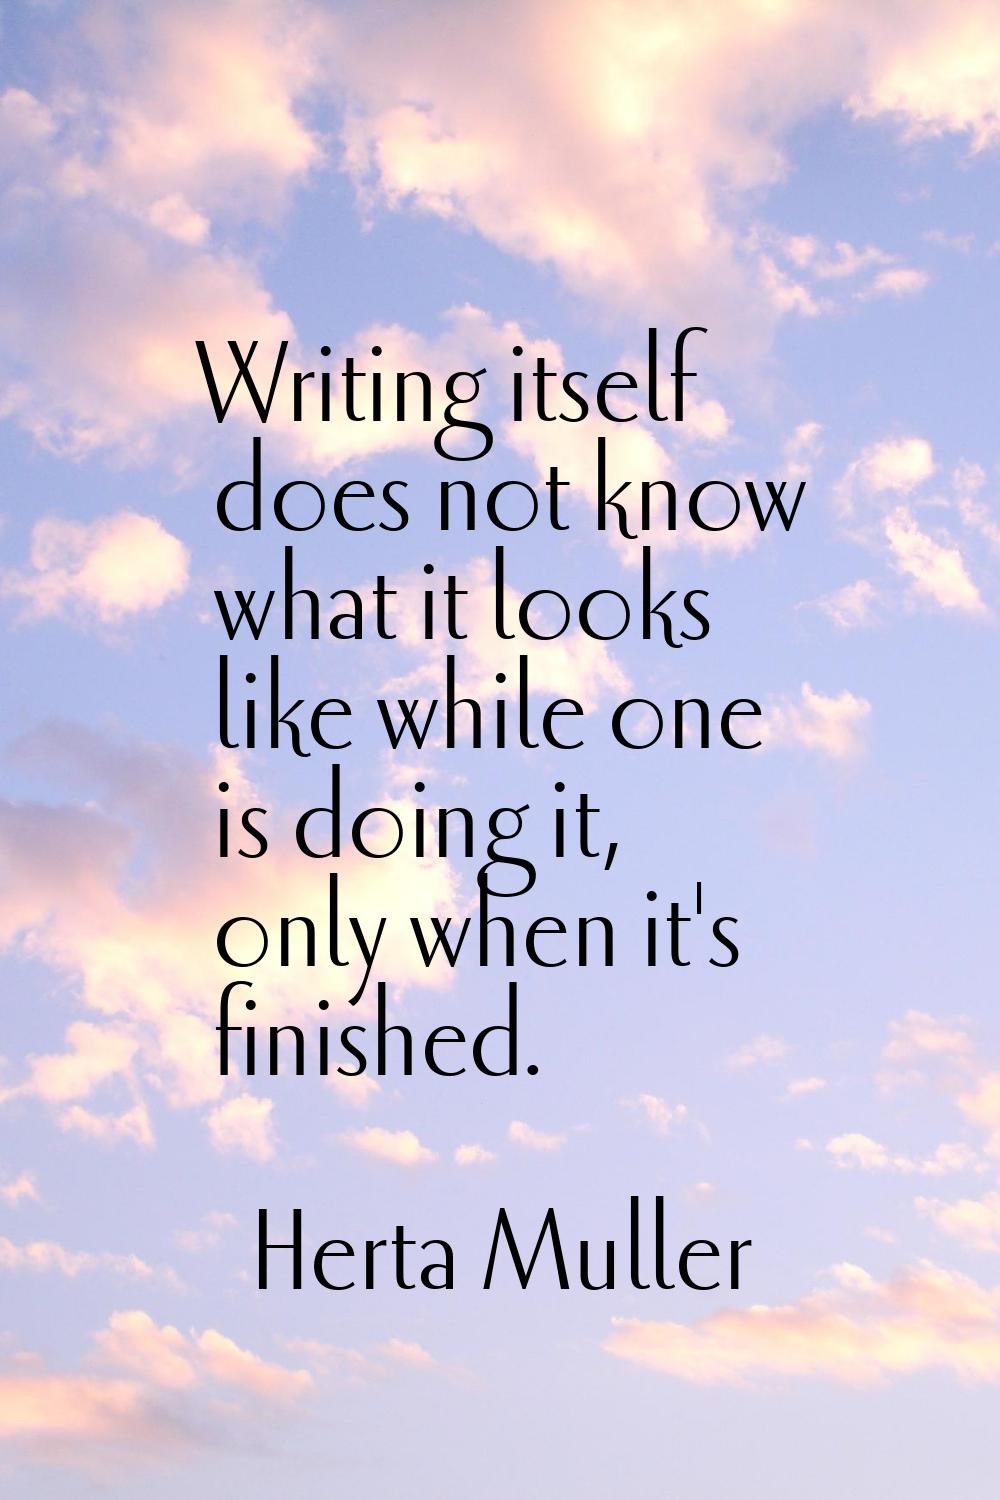 Writing itself does not know what it looks like while one is doing it, only when it's finished.